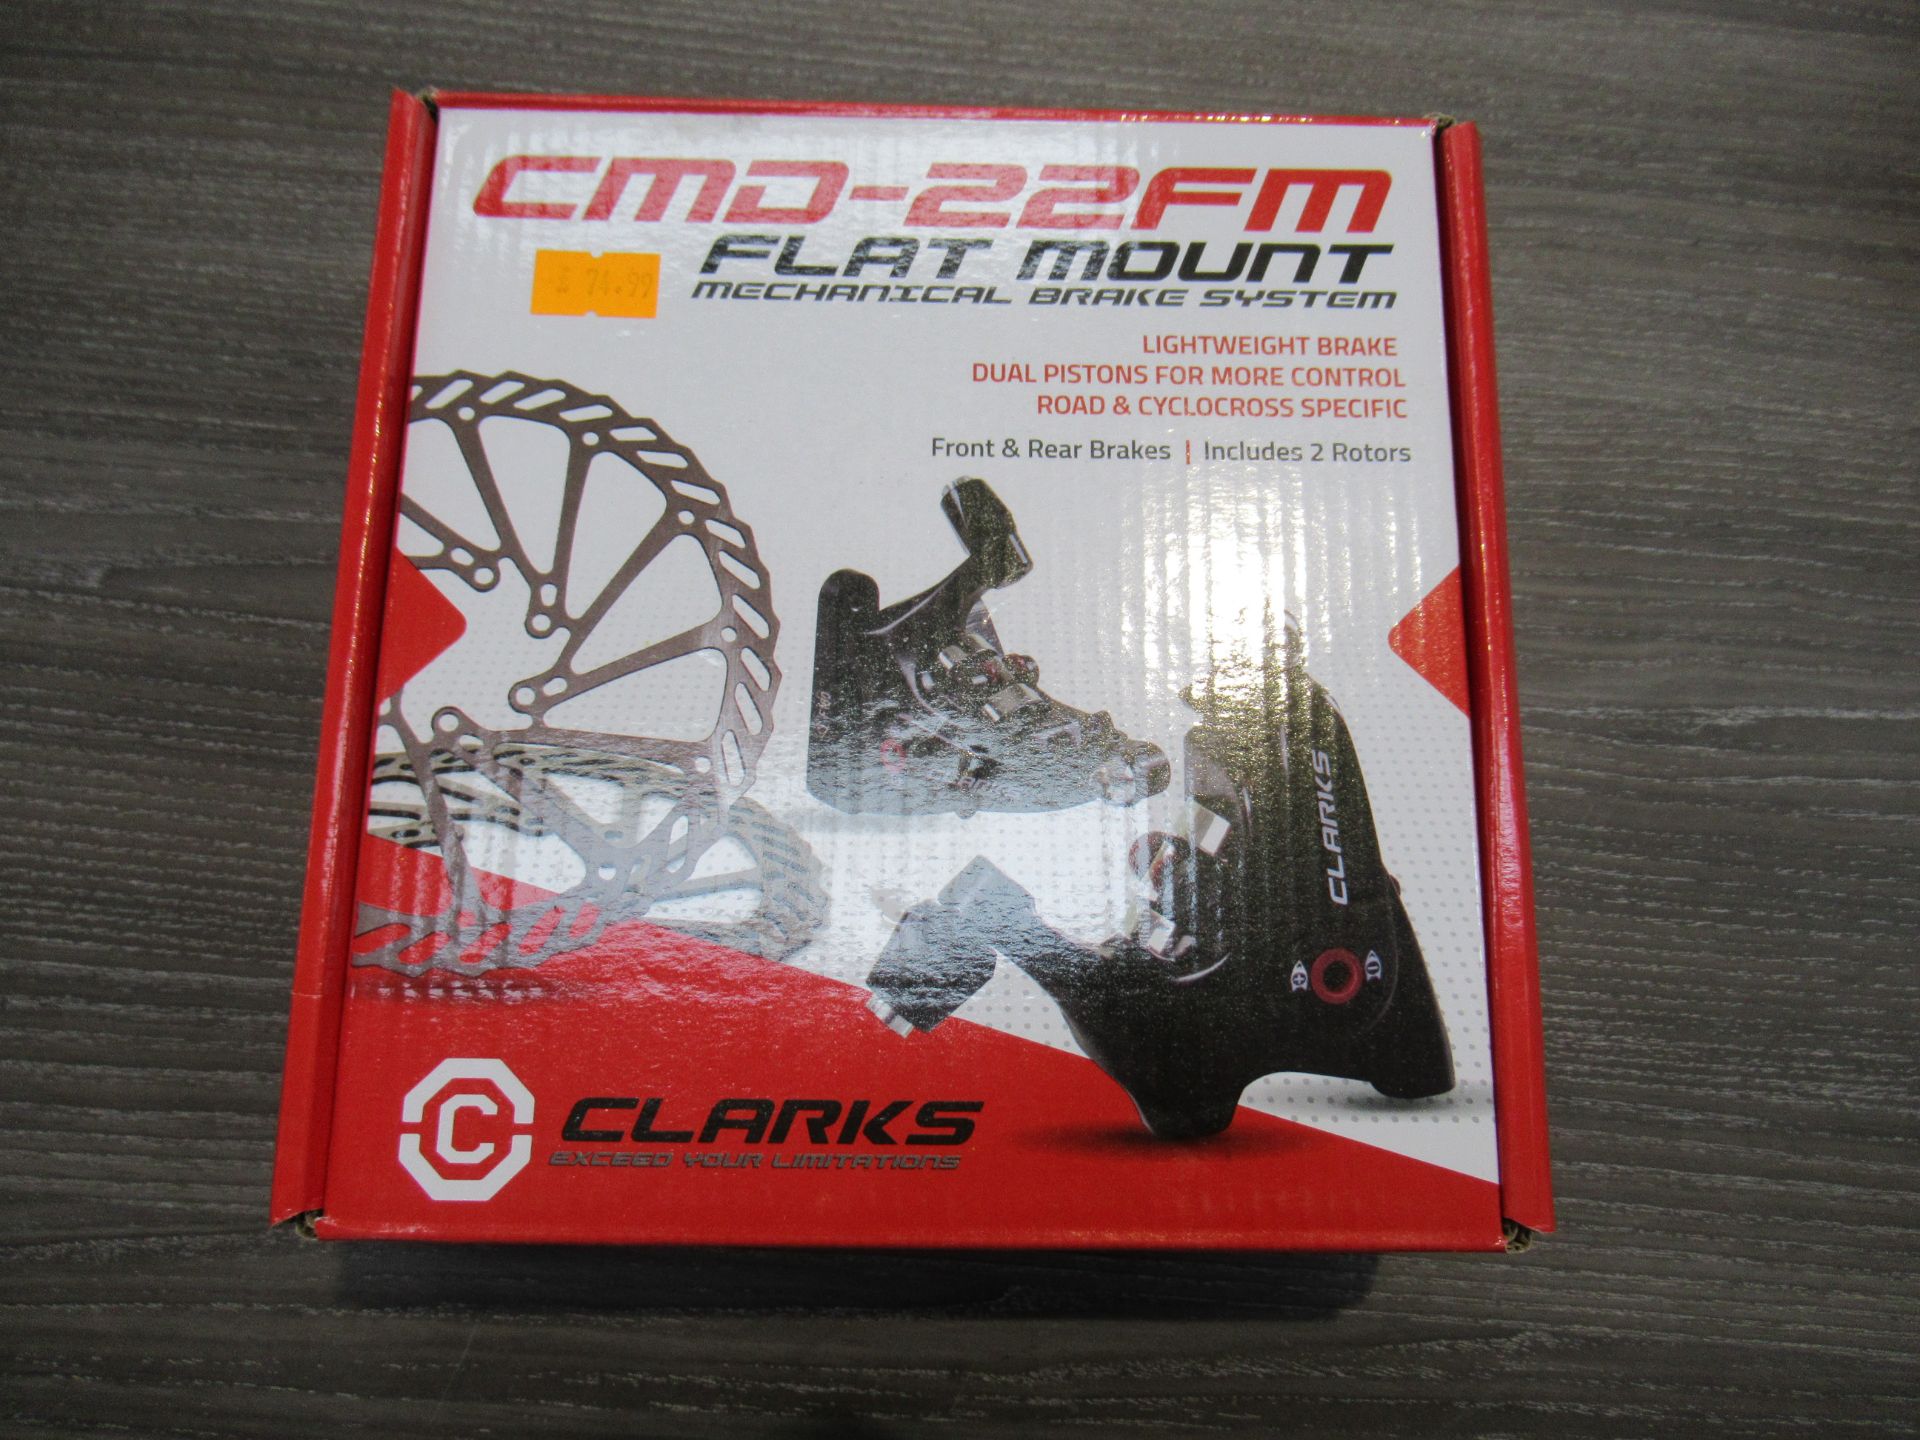 3 x Clarks CMD-22FM Flat Mount Mechanical Brake systems - 1 x missing rear set (RRP£54.99) 2 x compl - Image 4 of 4